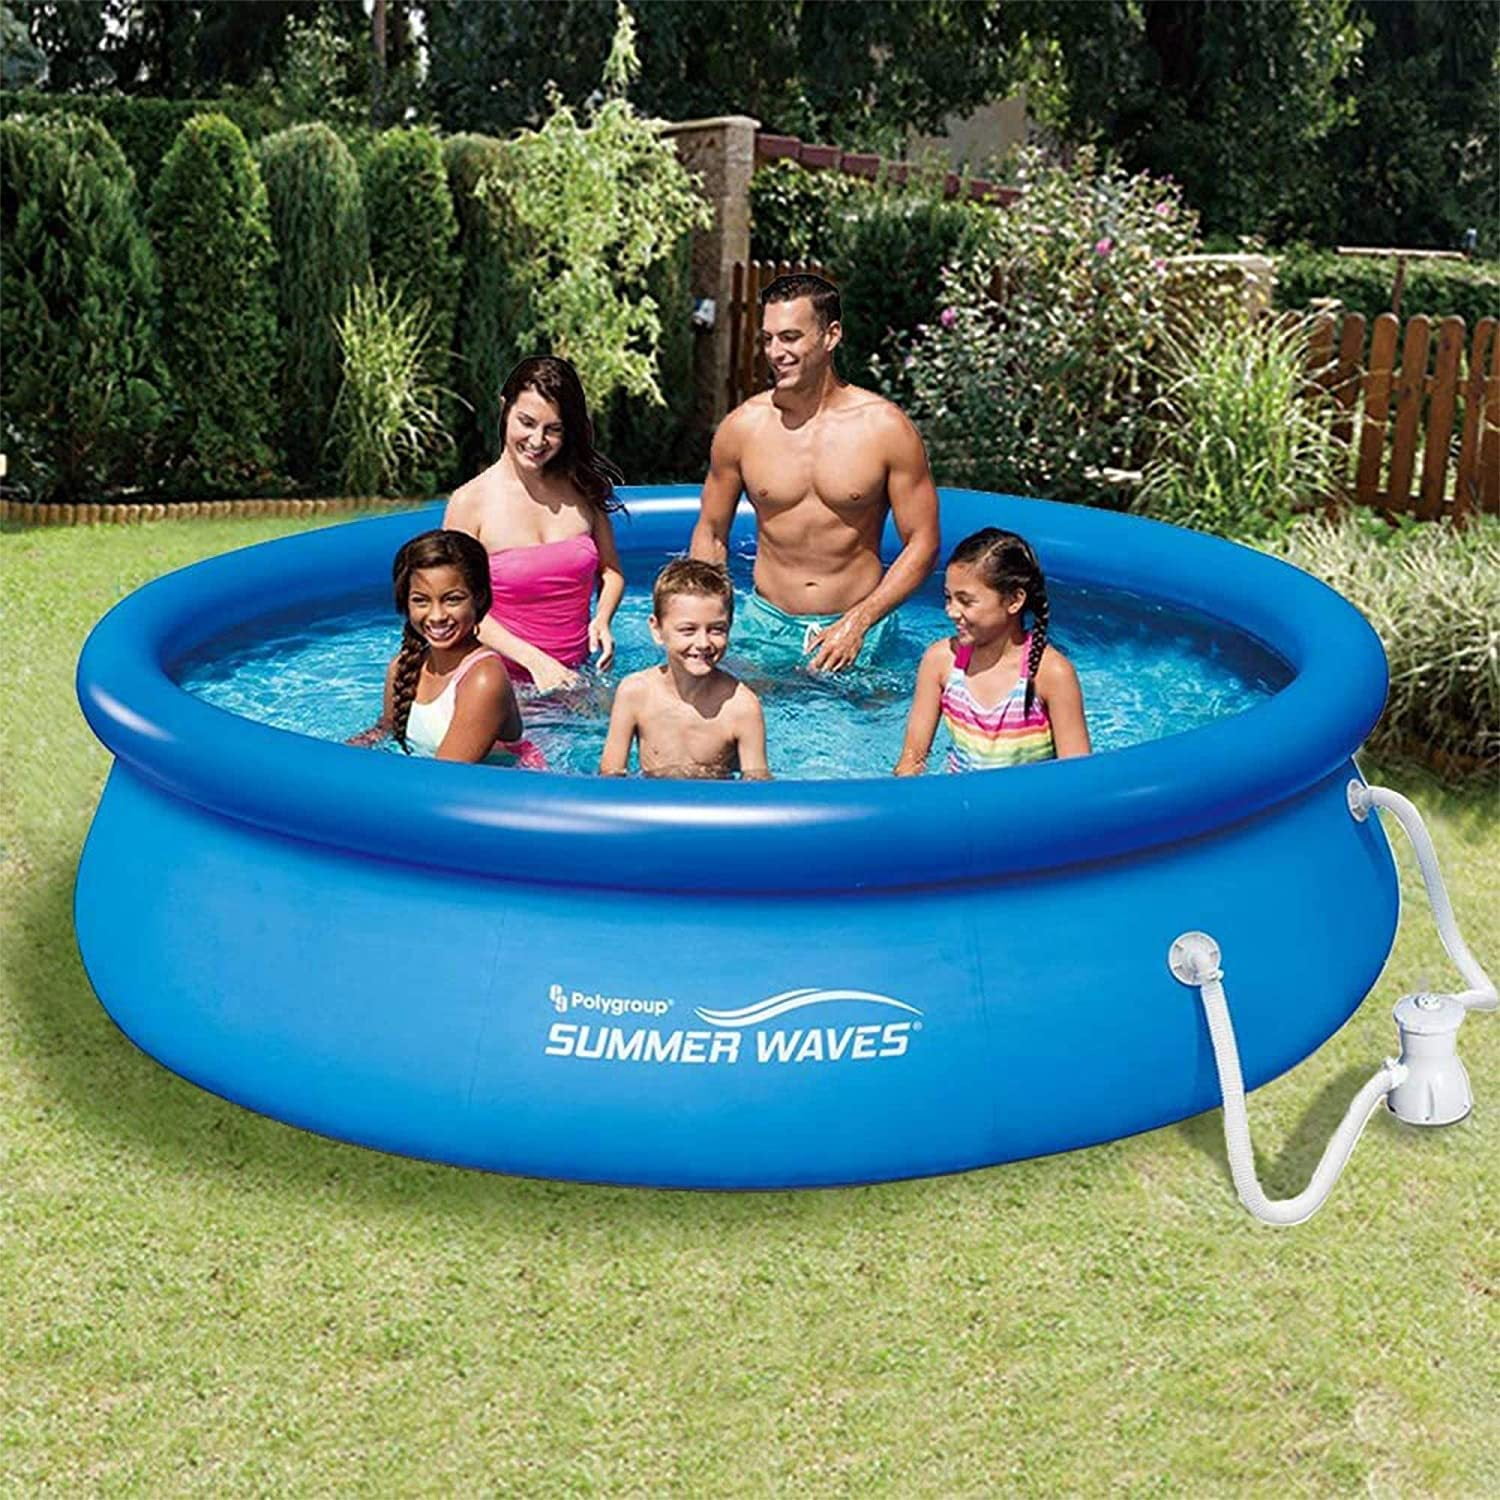 Outdoor Set Outdoor System, Filter Blue x Ground Quick Inflatable Pool GFCI Waves with 10ft Swimming Summer Ring RX300 Pump 2.5ft Above P1001030A